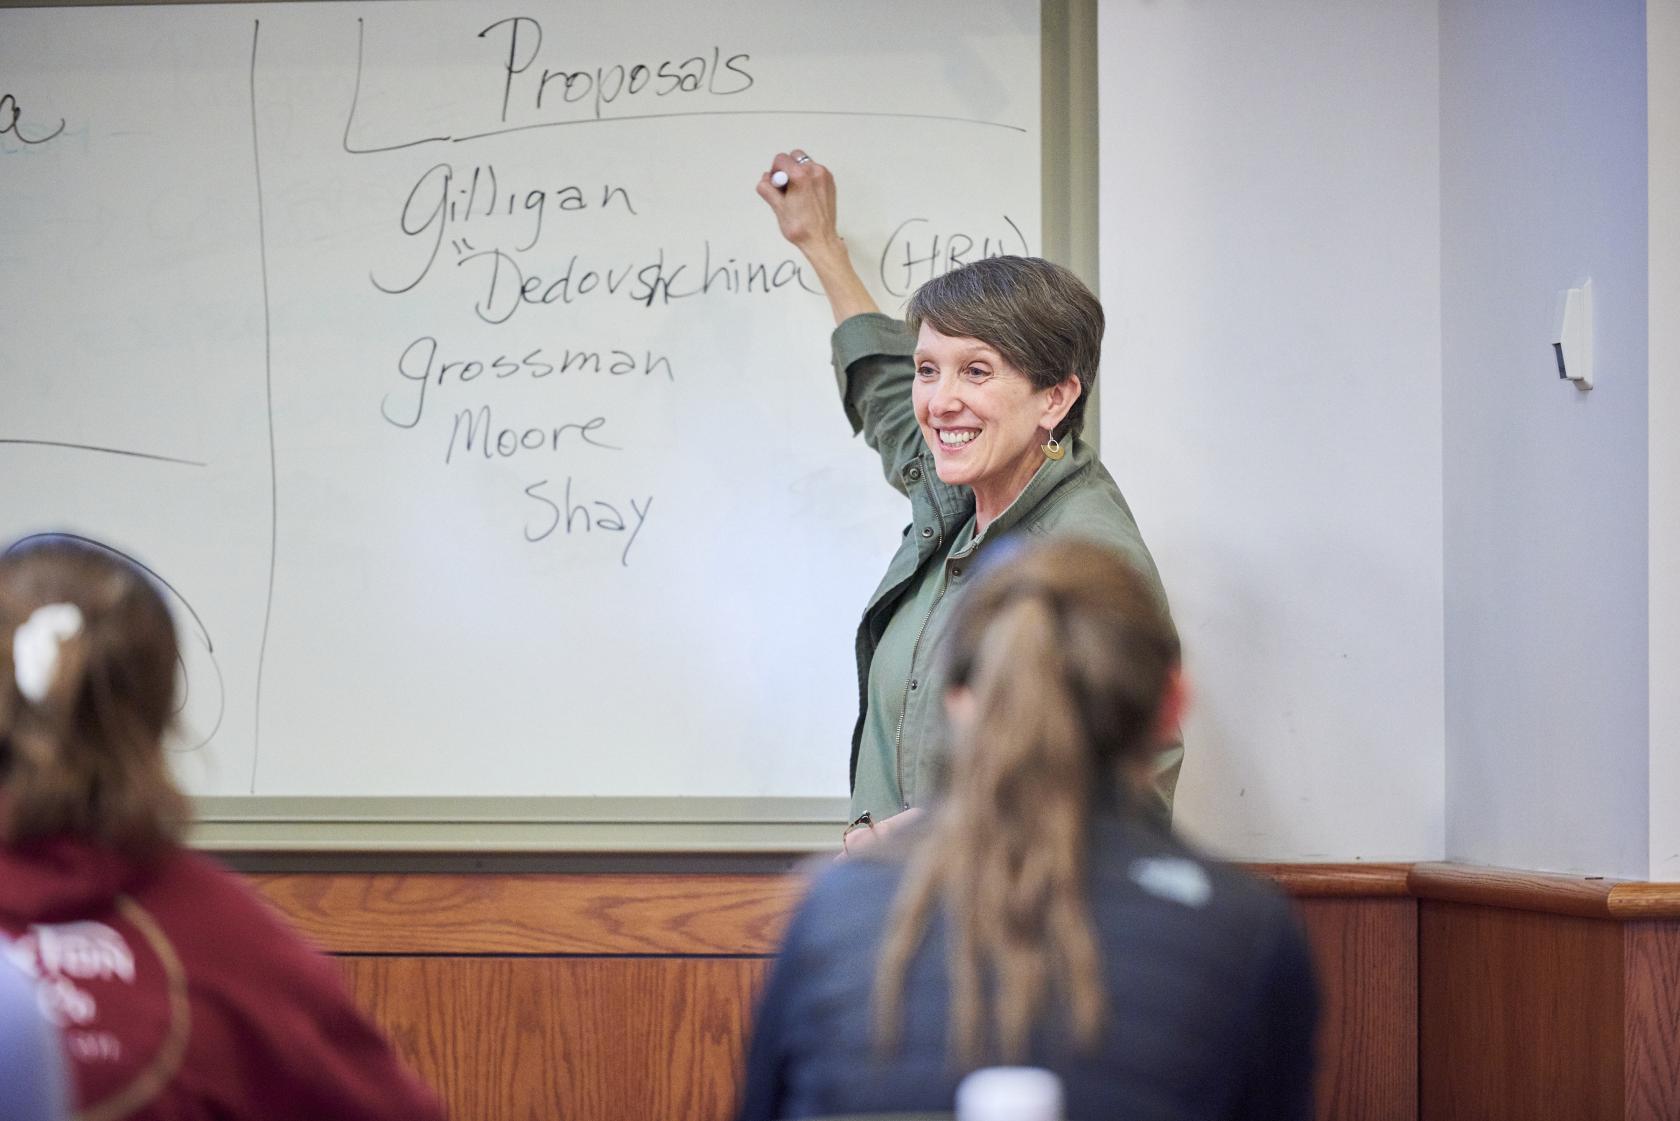 Professor writes on a whiteboard while addressing classroom